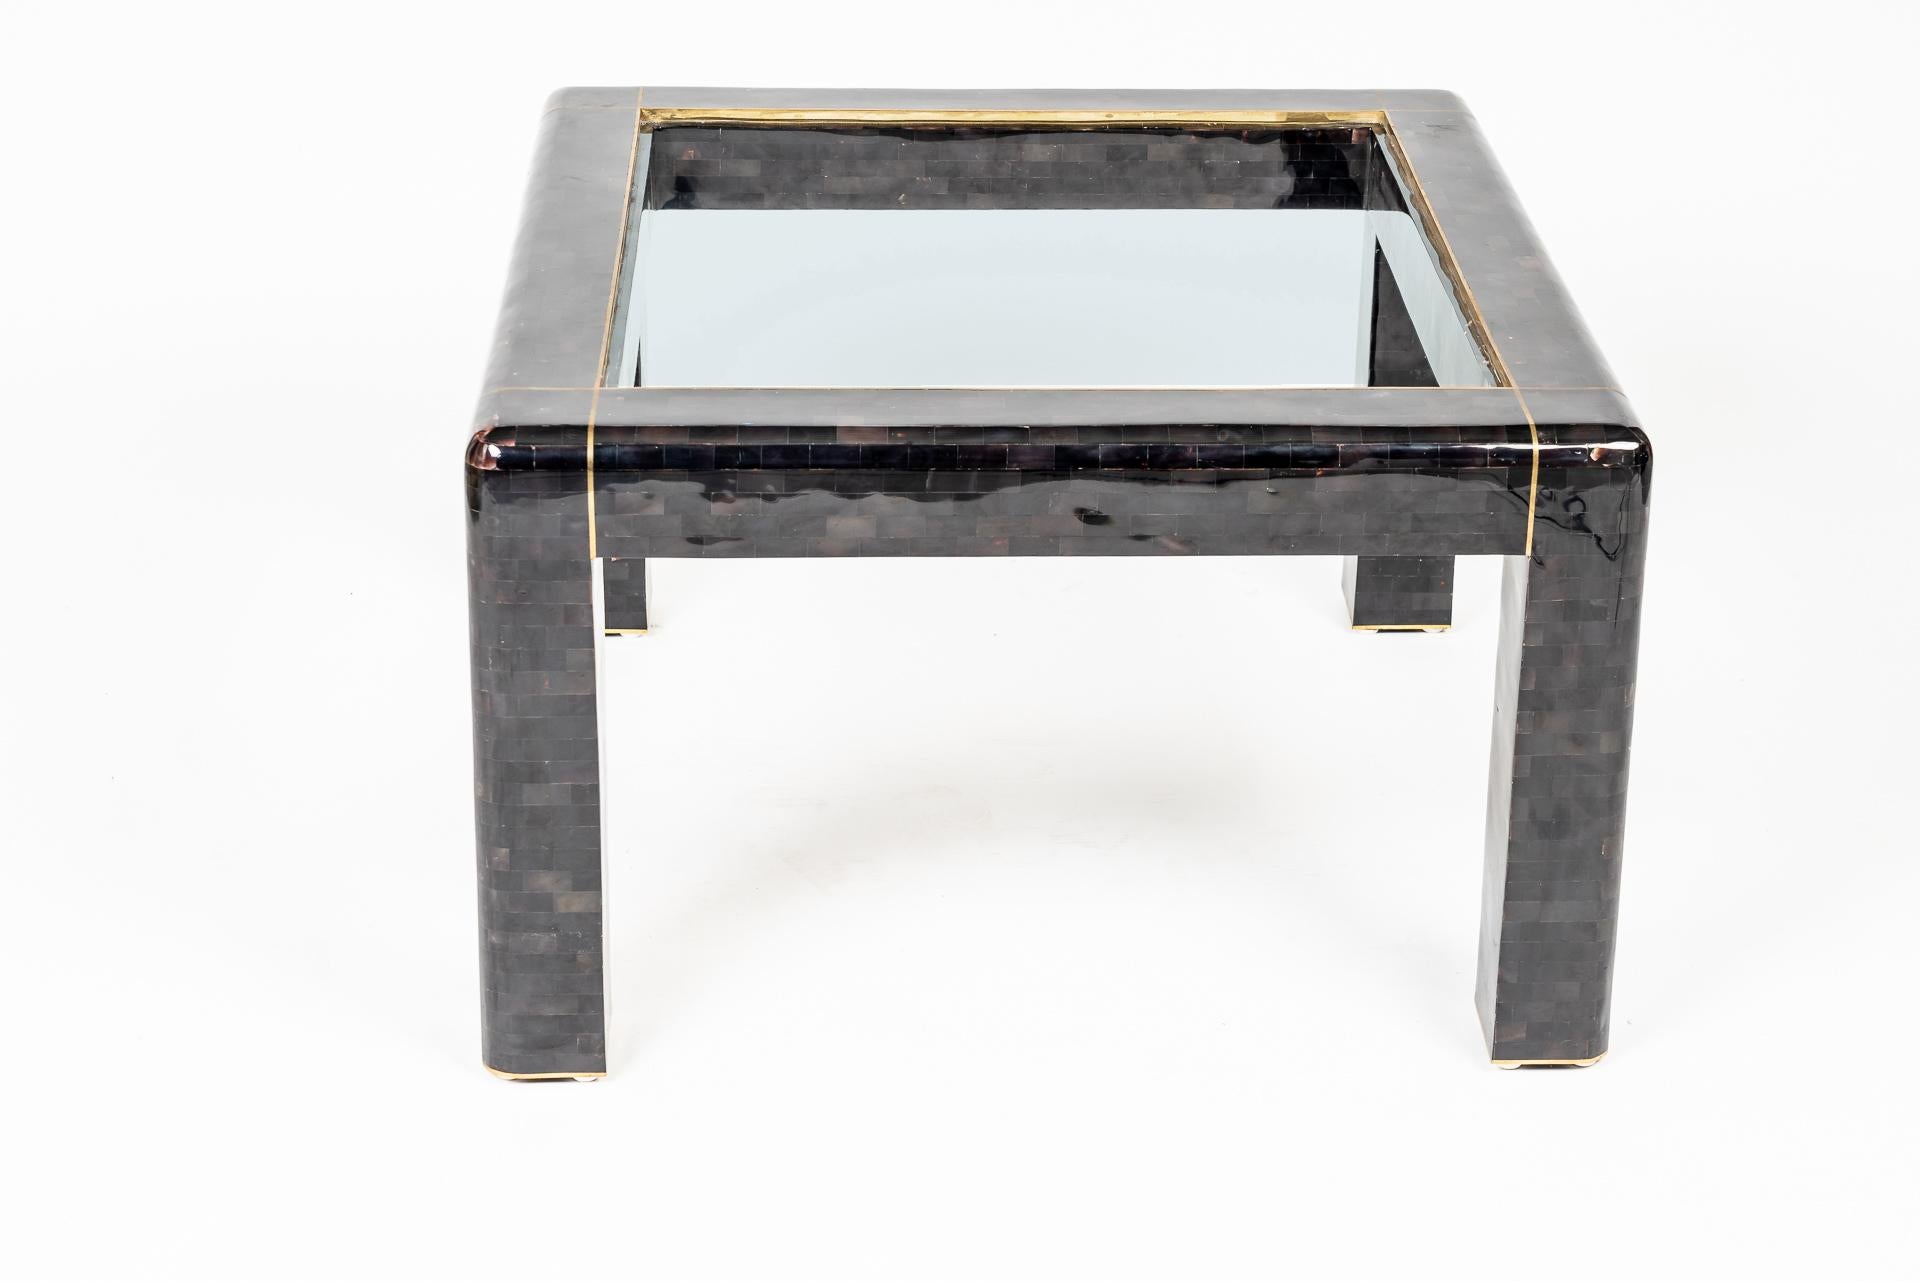 This beautiful manufactured side table by Maitland Smith shows the delicate work with materials like shell mosaic. The structure is covered by rectangular dark colored shell mosaic pieces and has at the top a small brass inlay as well as a glas